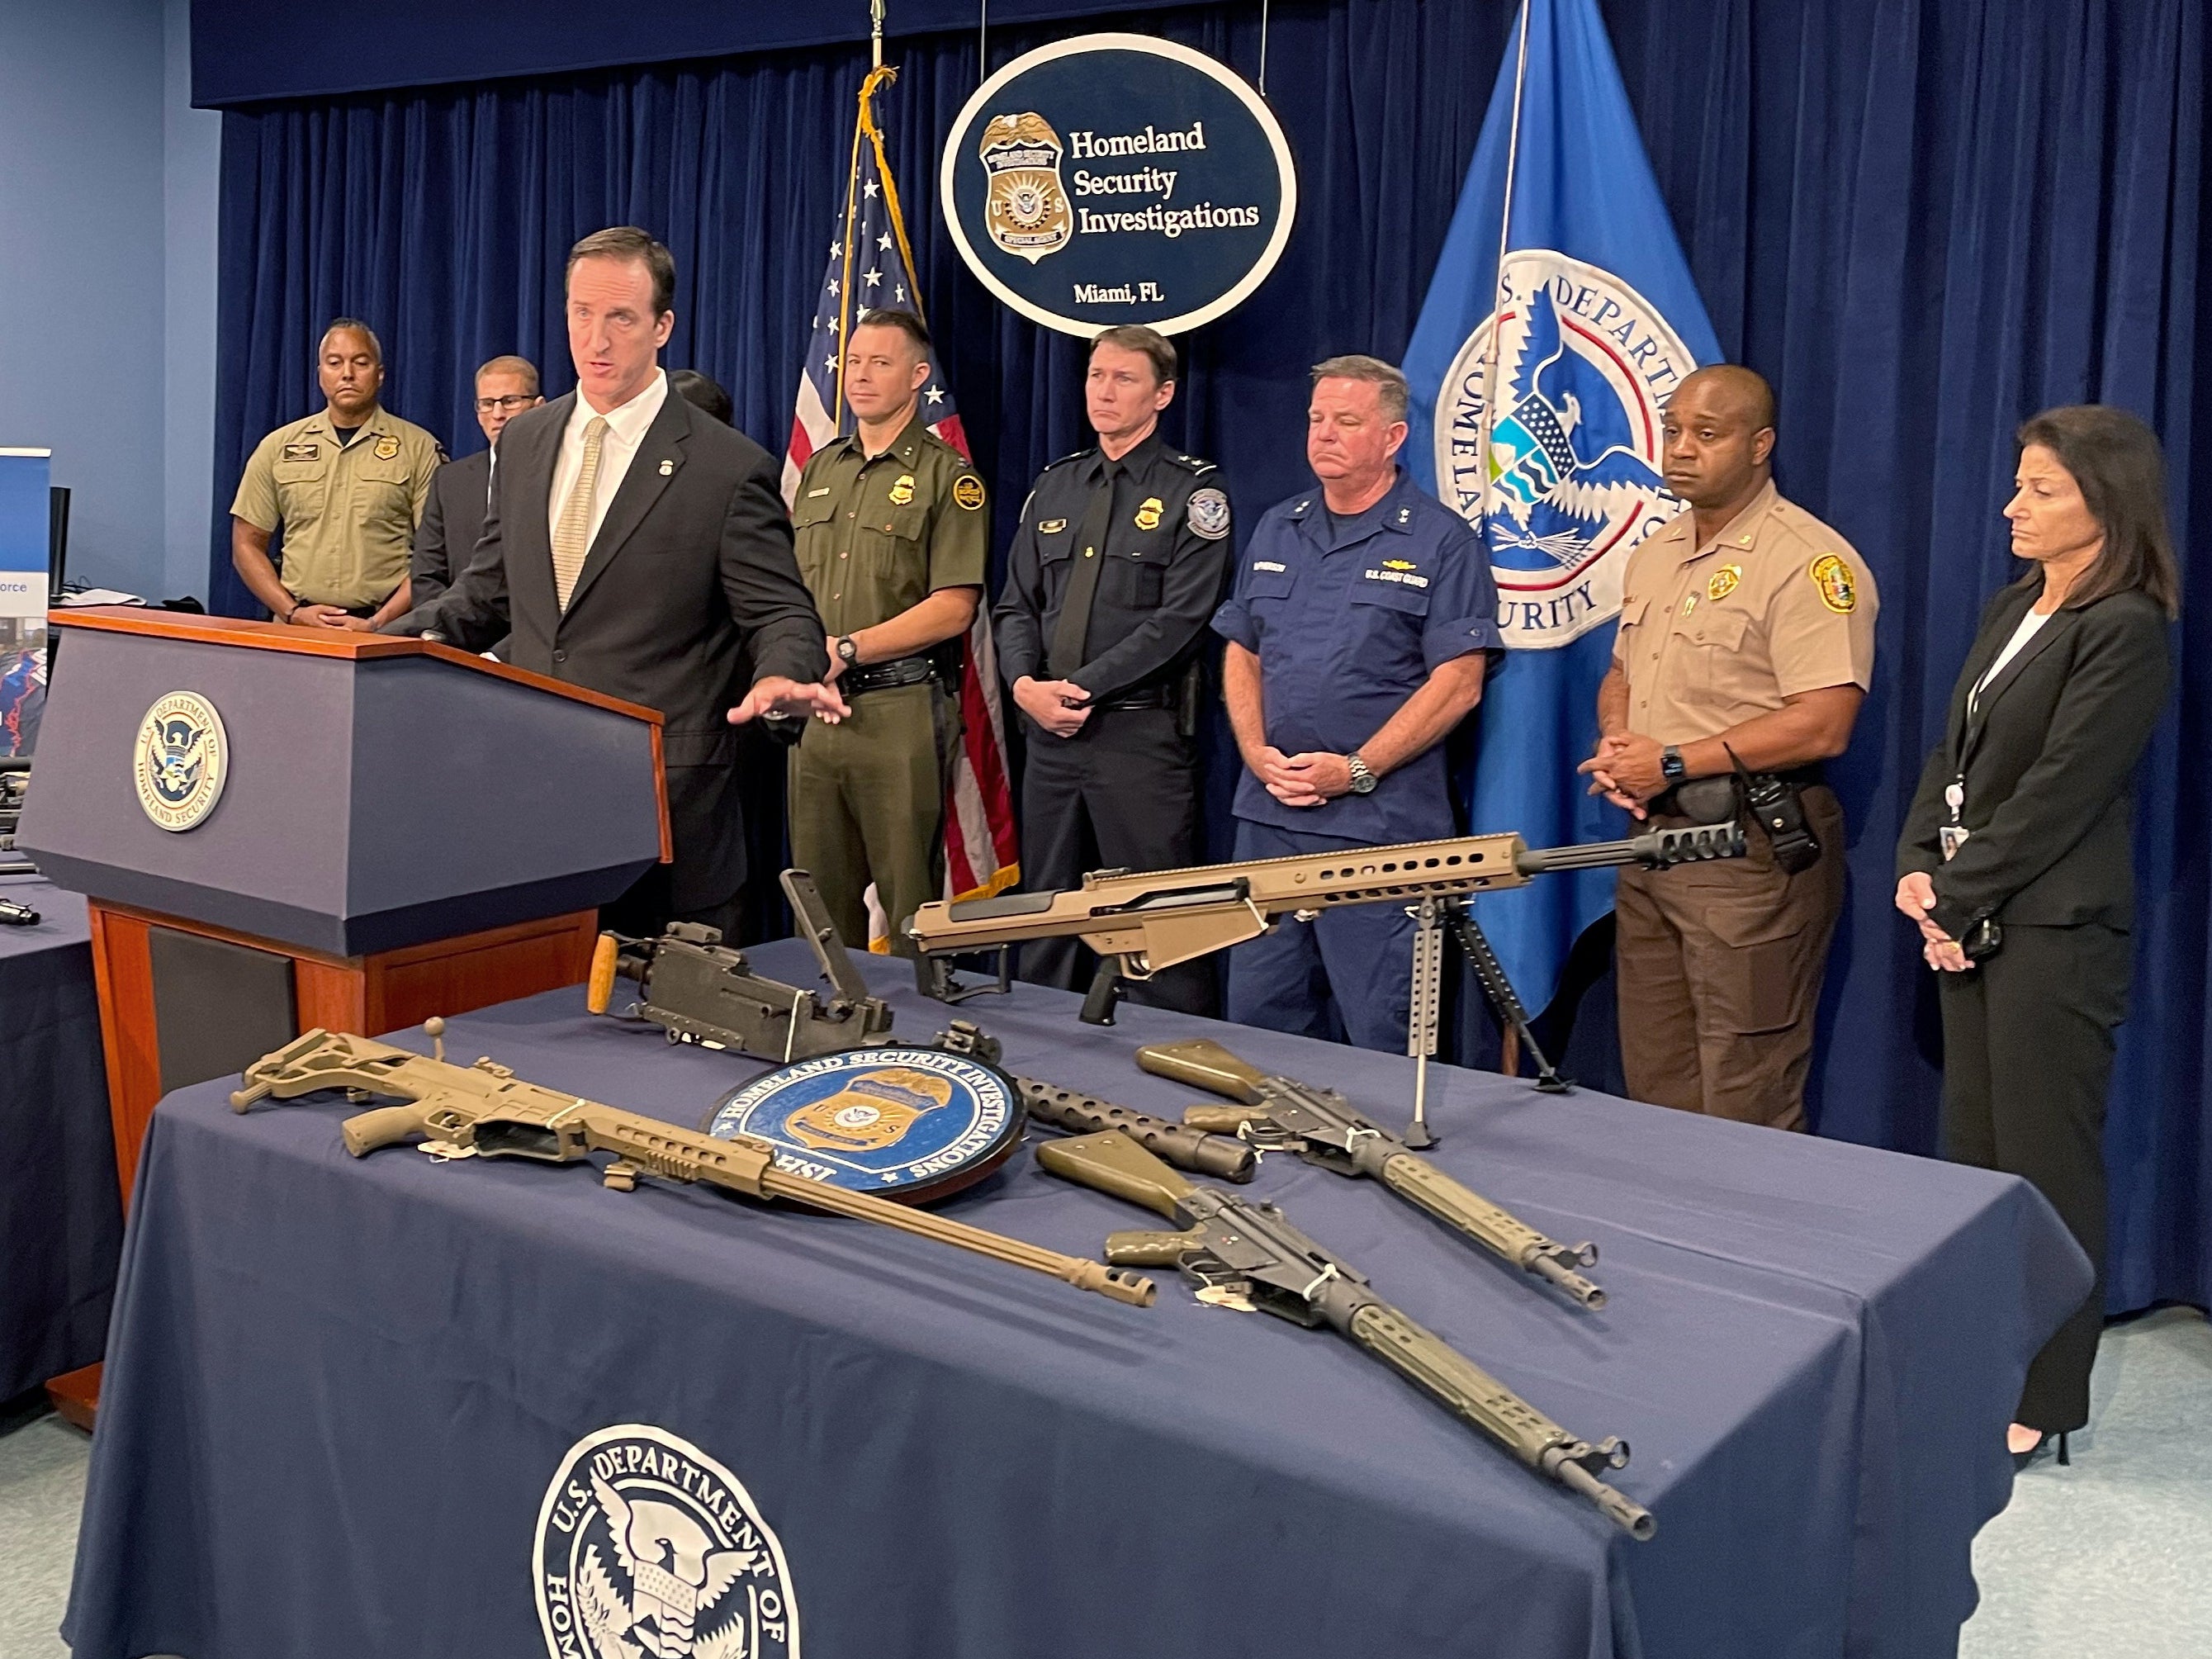 Anthony Salisbury, Special Agent in Charge of Homeland Security Investigations Miami speaks as weapons seized by U.S. authorities that had been destined for illegal export to Haiti are displayed at a news conference in Miami, Florida